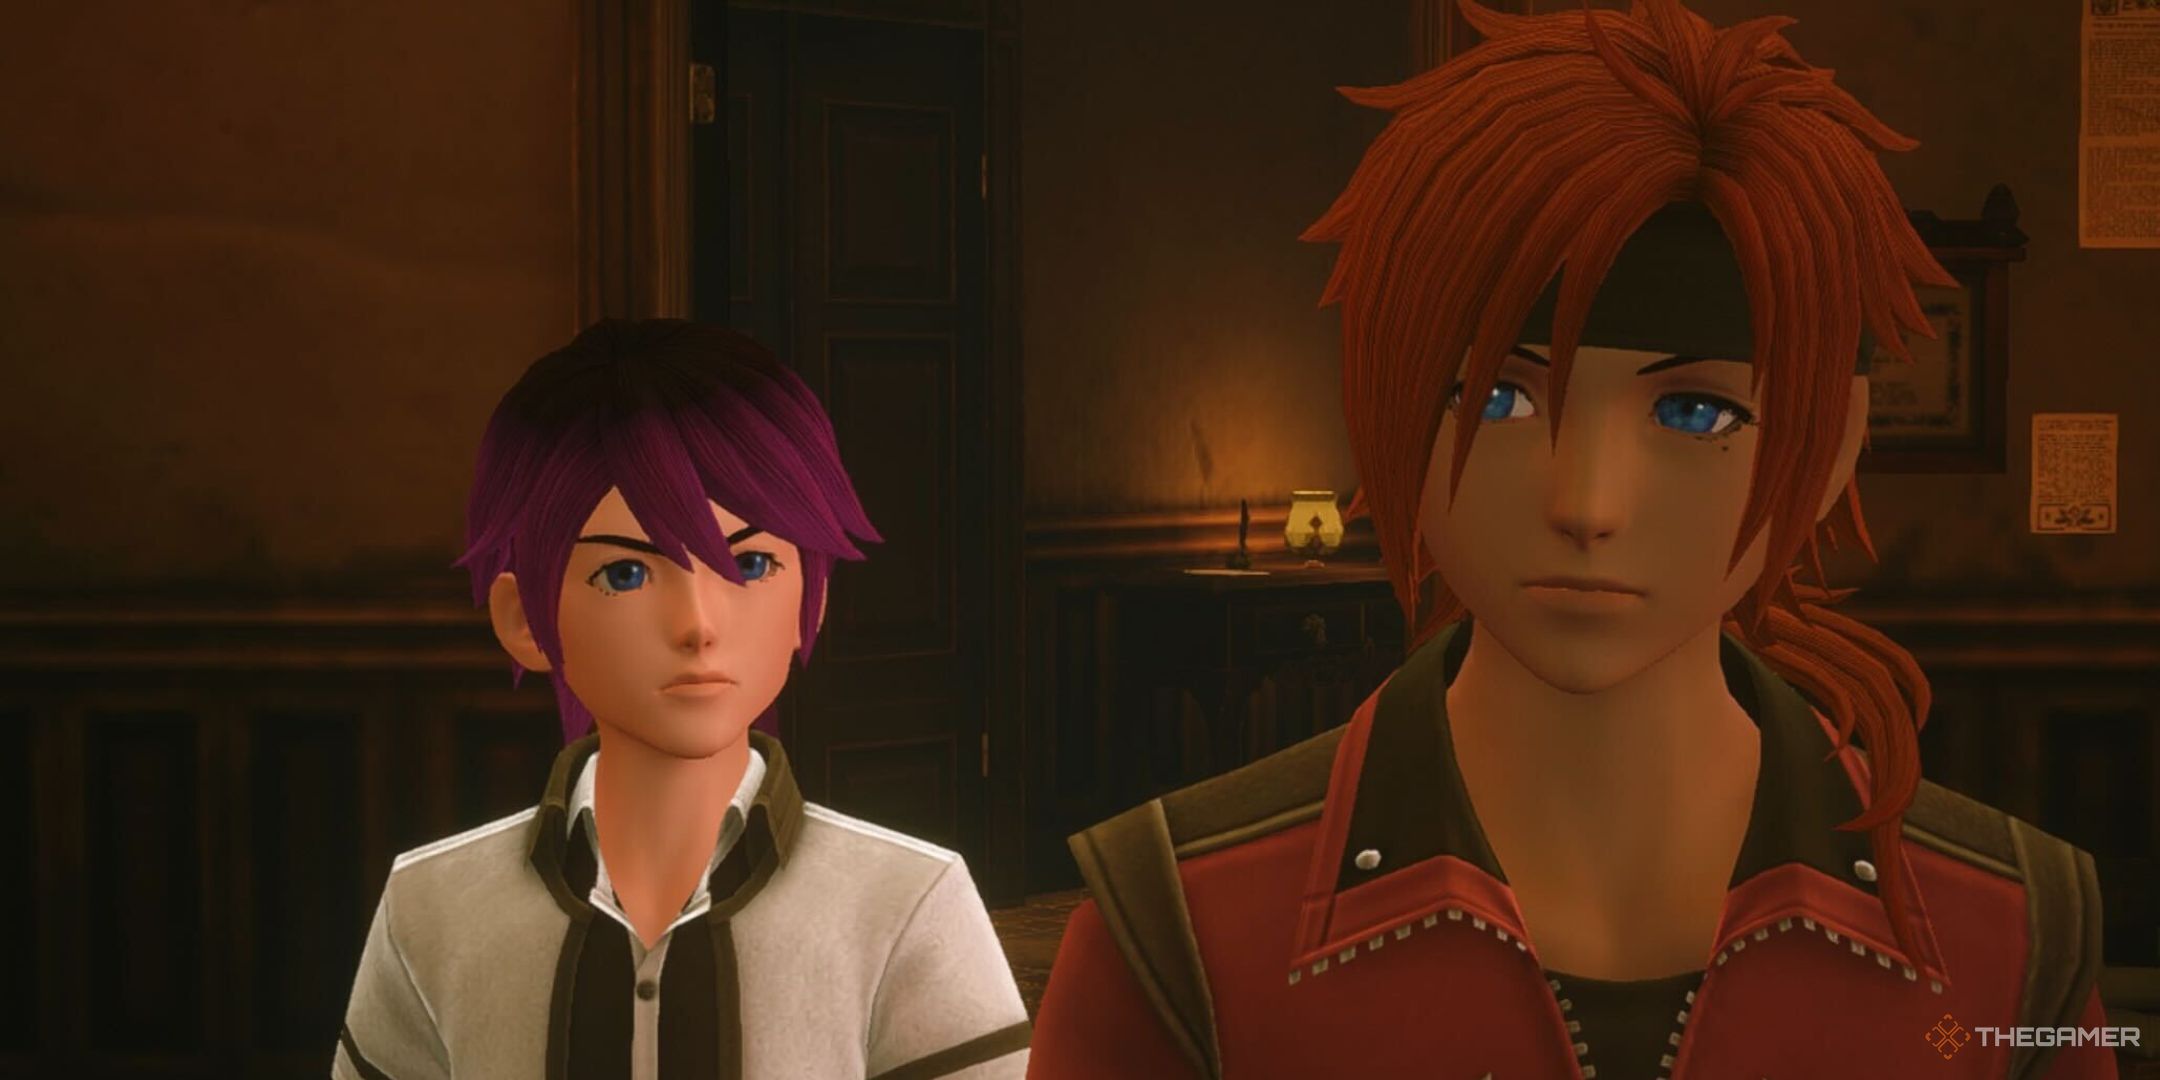 The Missing Link protagonist and Remus in Kingdom Hearts: Missing Link.